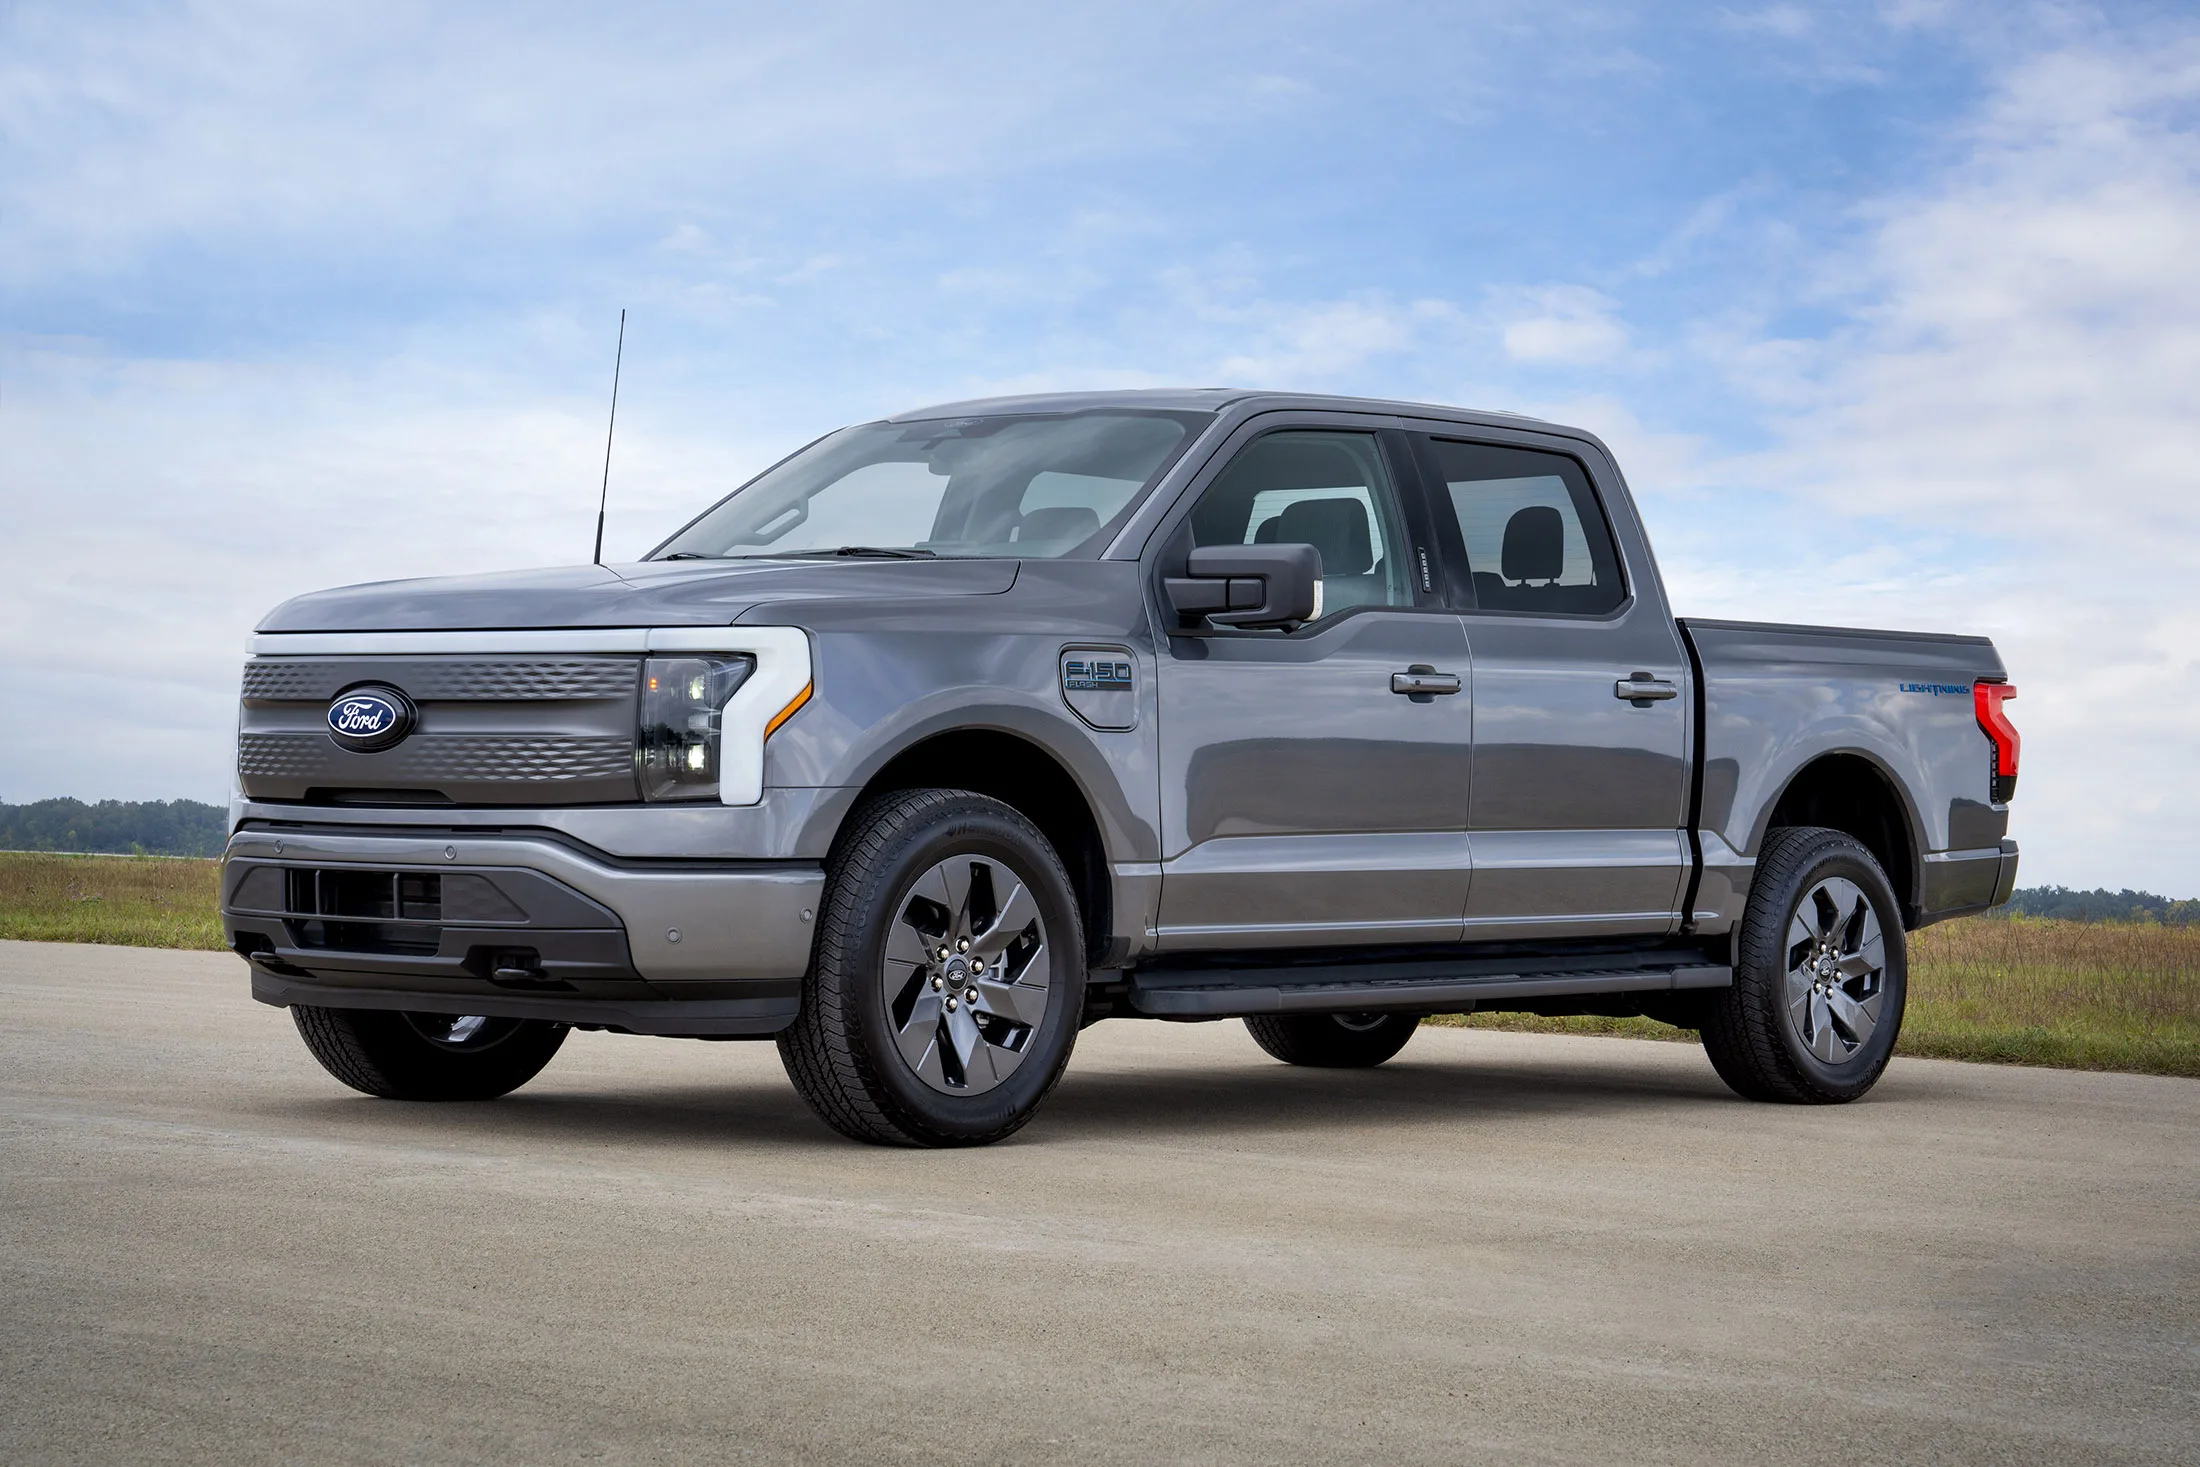 Ford increases the price of its entry-level F-150 Lightning by $5,000